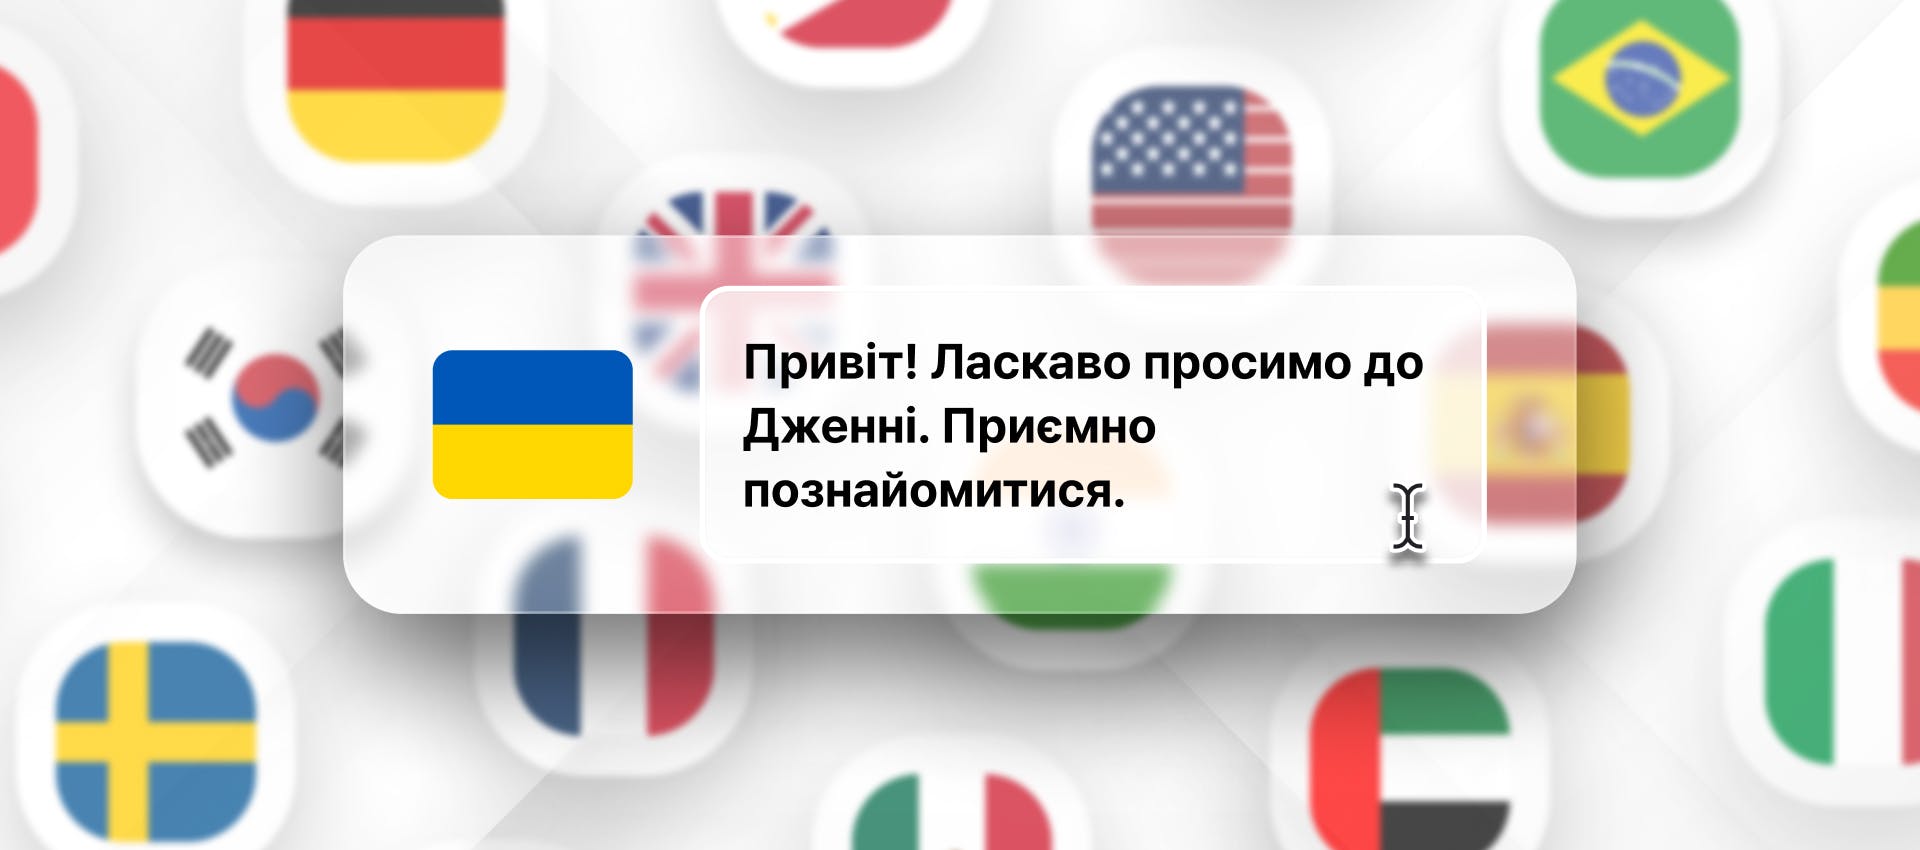 Ukrainian phrase for Ukrainian TTS generation with different flags in the background